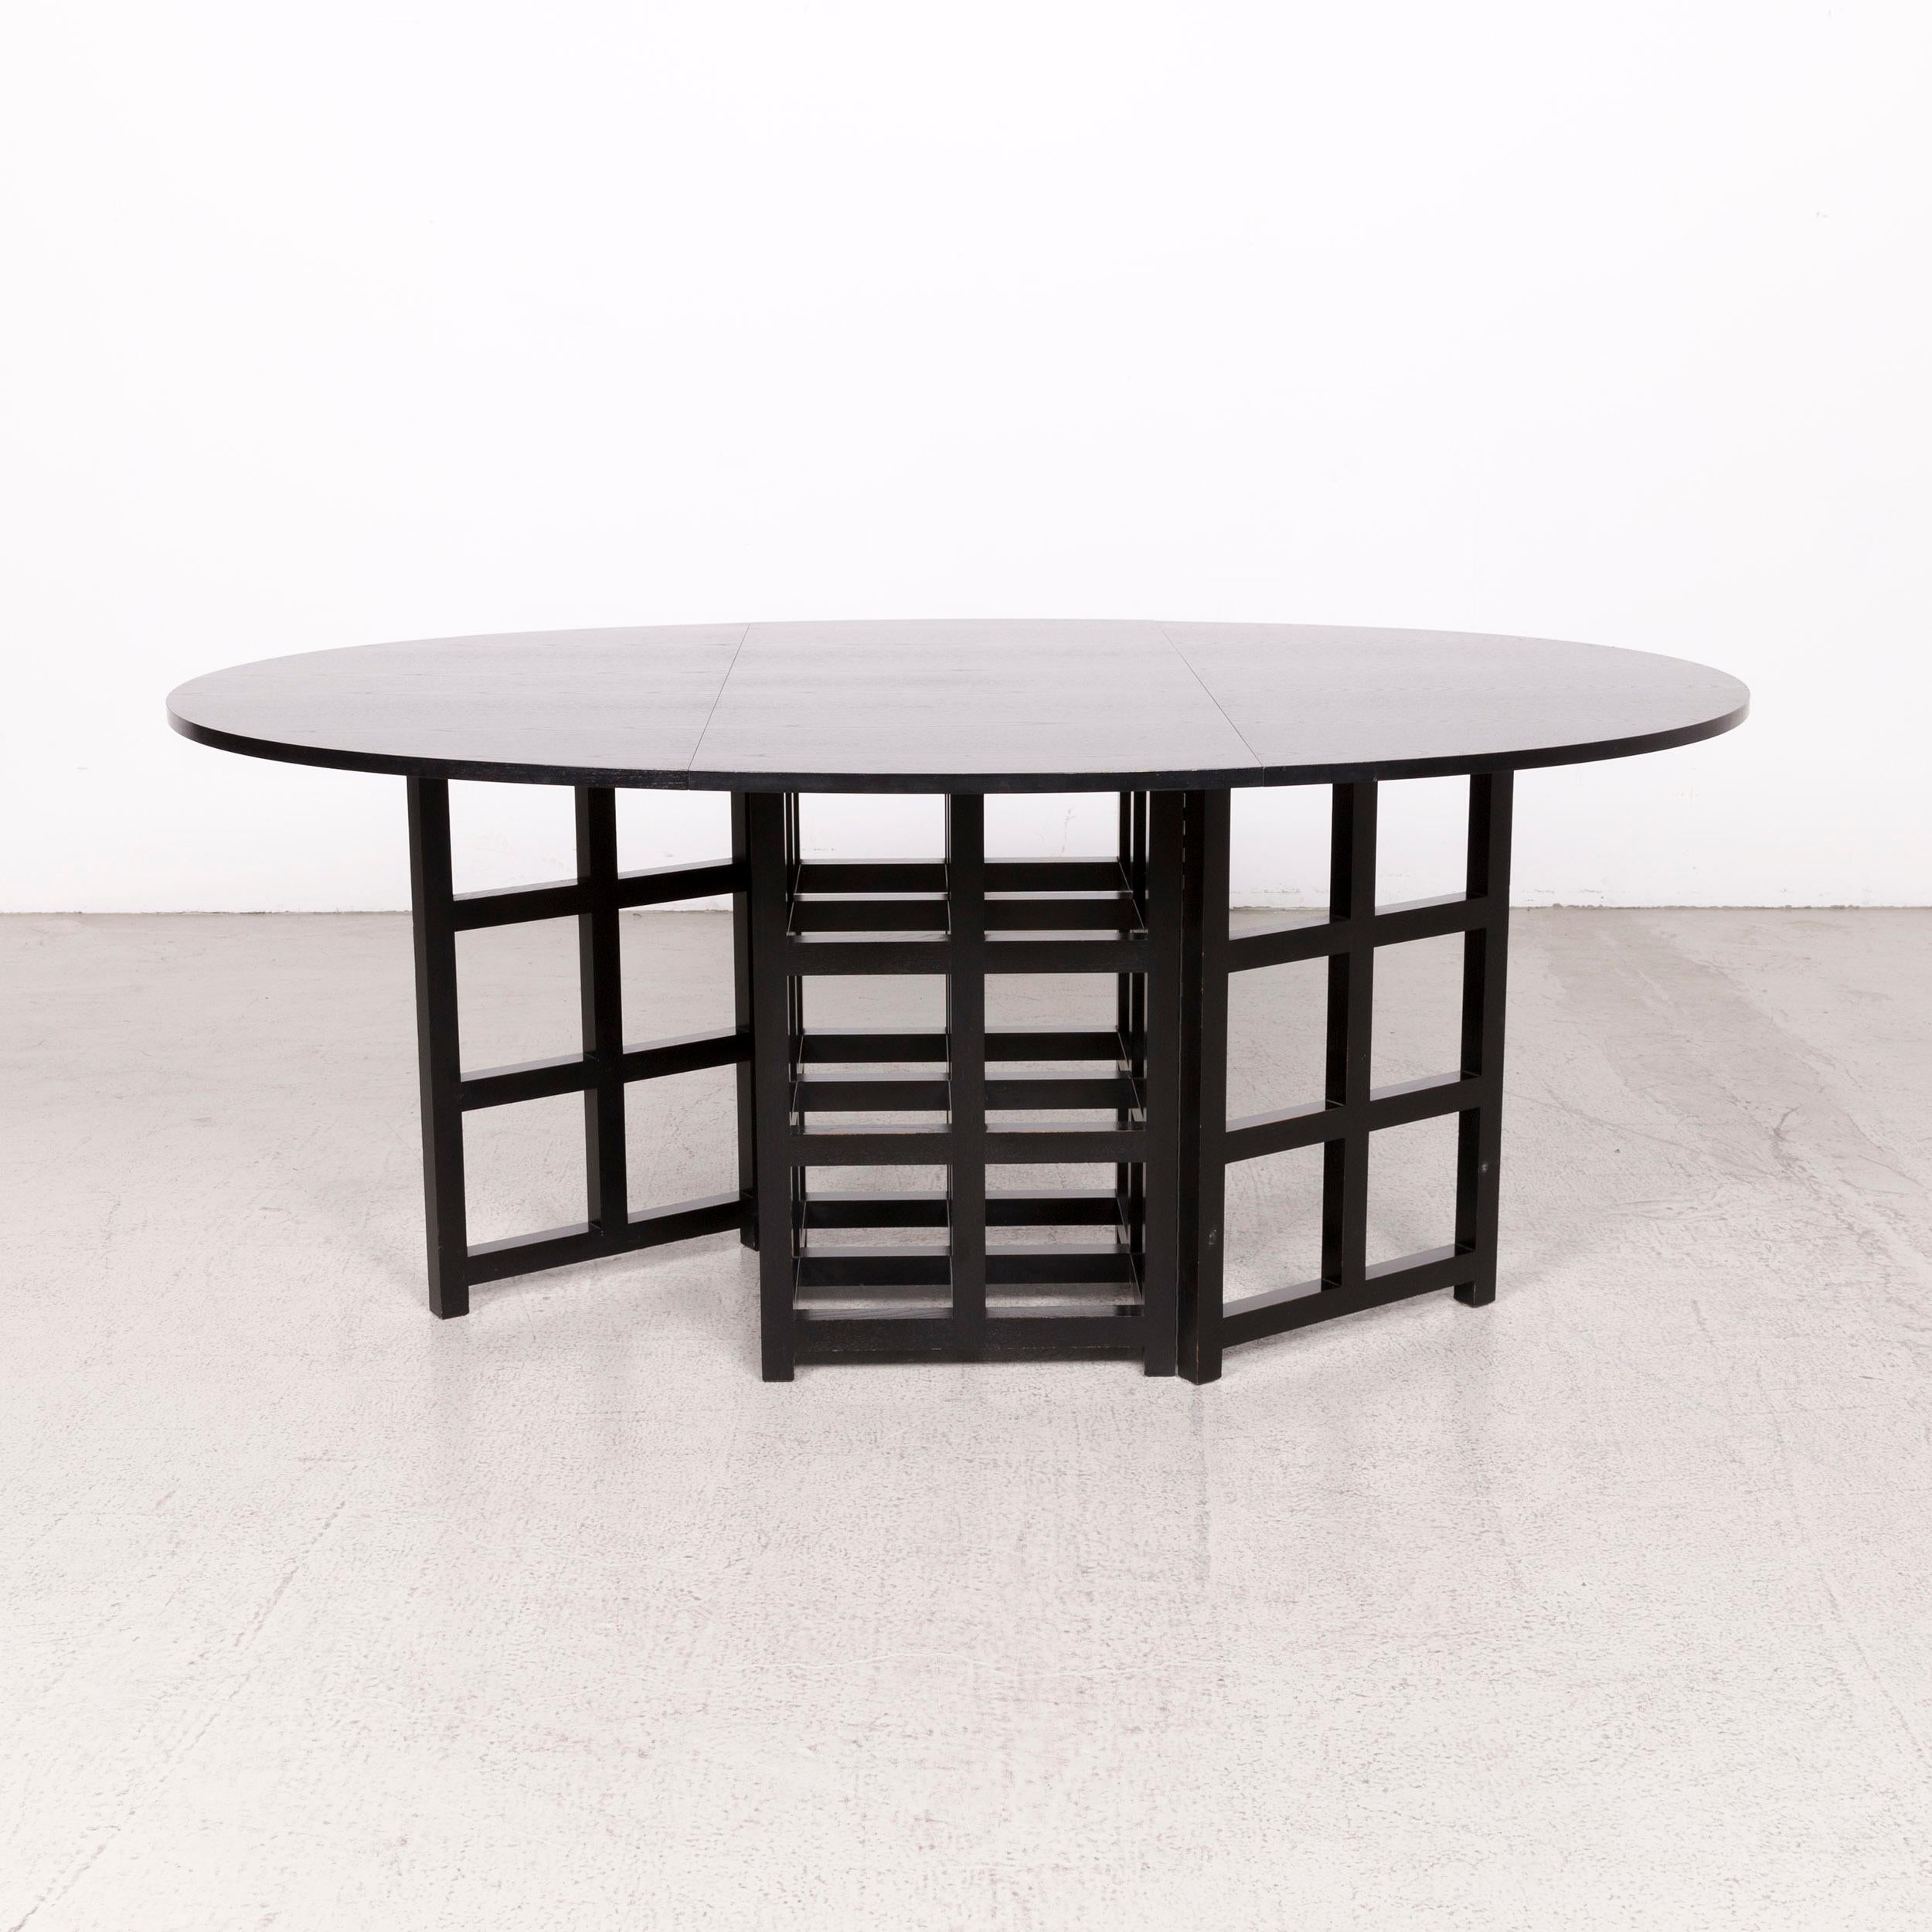 We bring to you a Cassina d.s. 1 designer wood dining table black.

Product measurements in centimeters:

Depth 125
Width 177
Height 75.





     